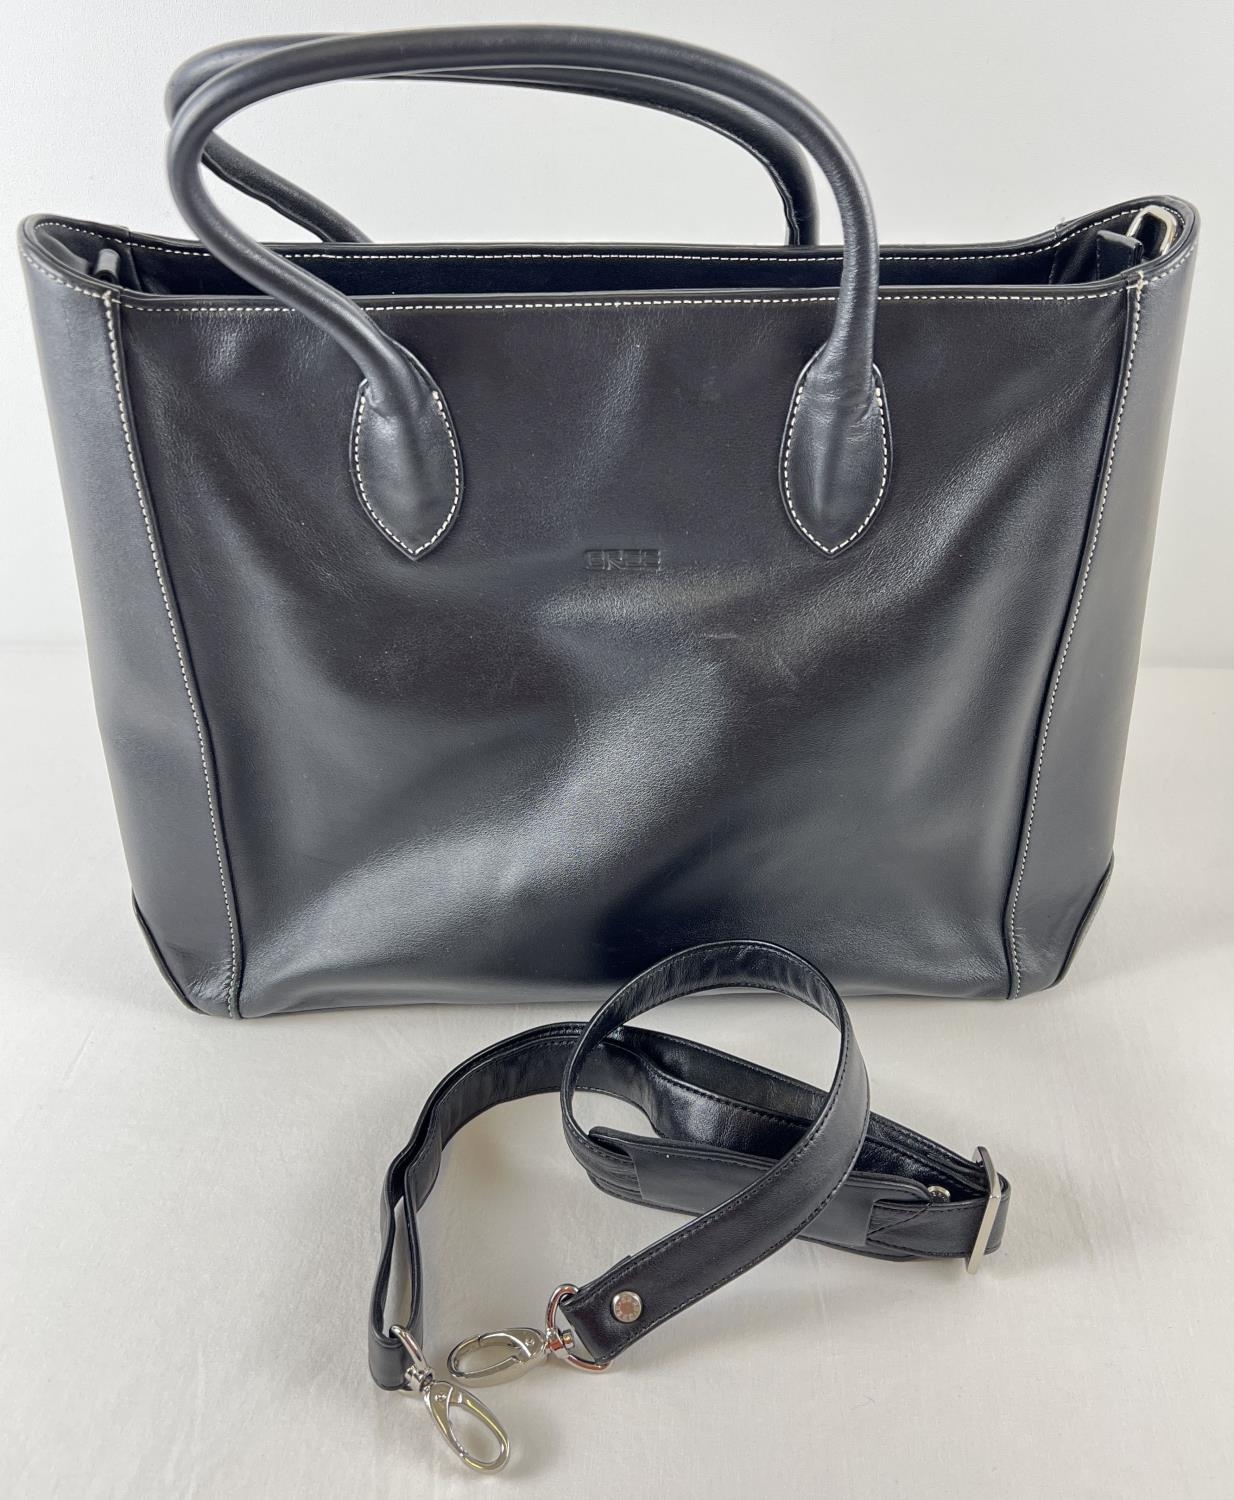 A soft black leather laptop tote work bag by Bree. Complete with detachable shoulder strap. Black - Image 4 of 7